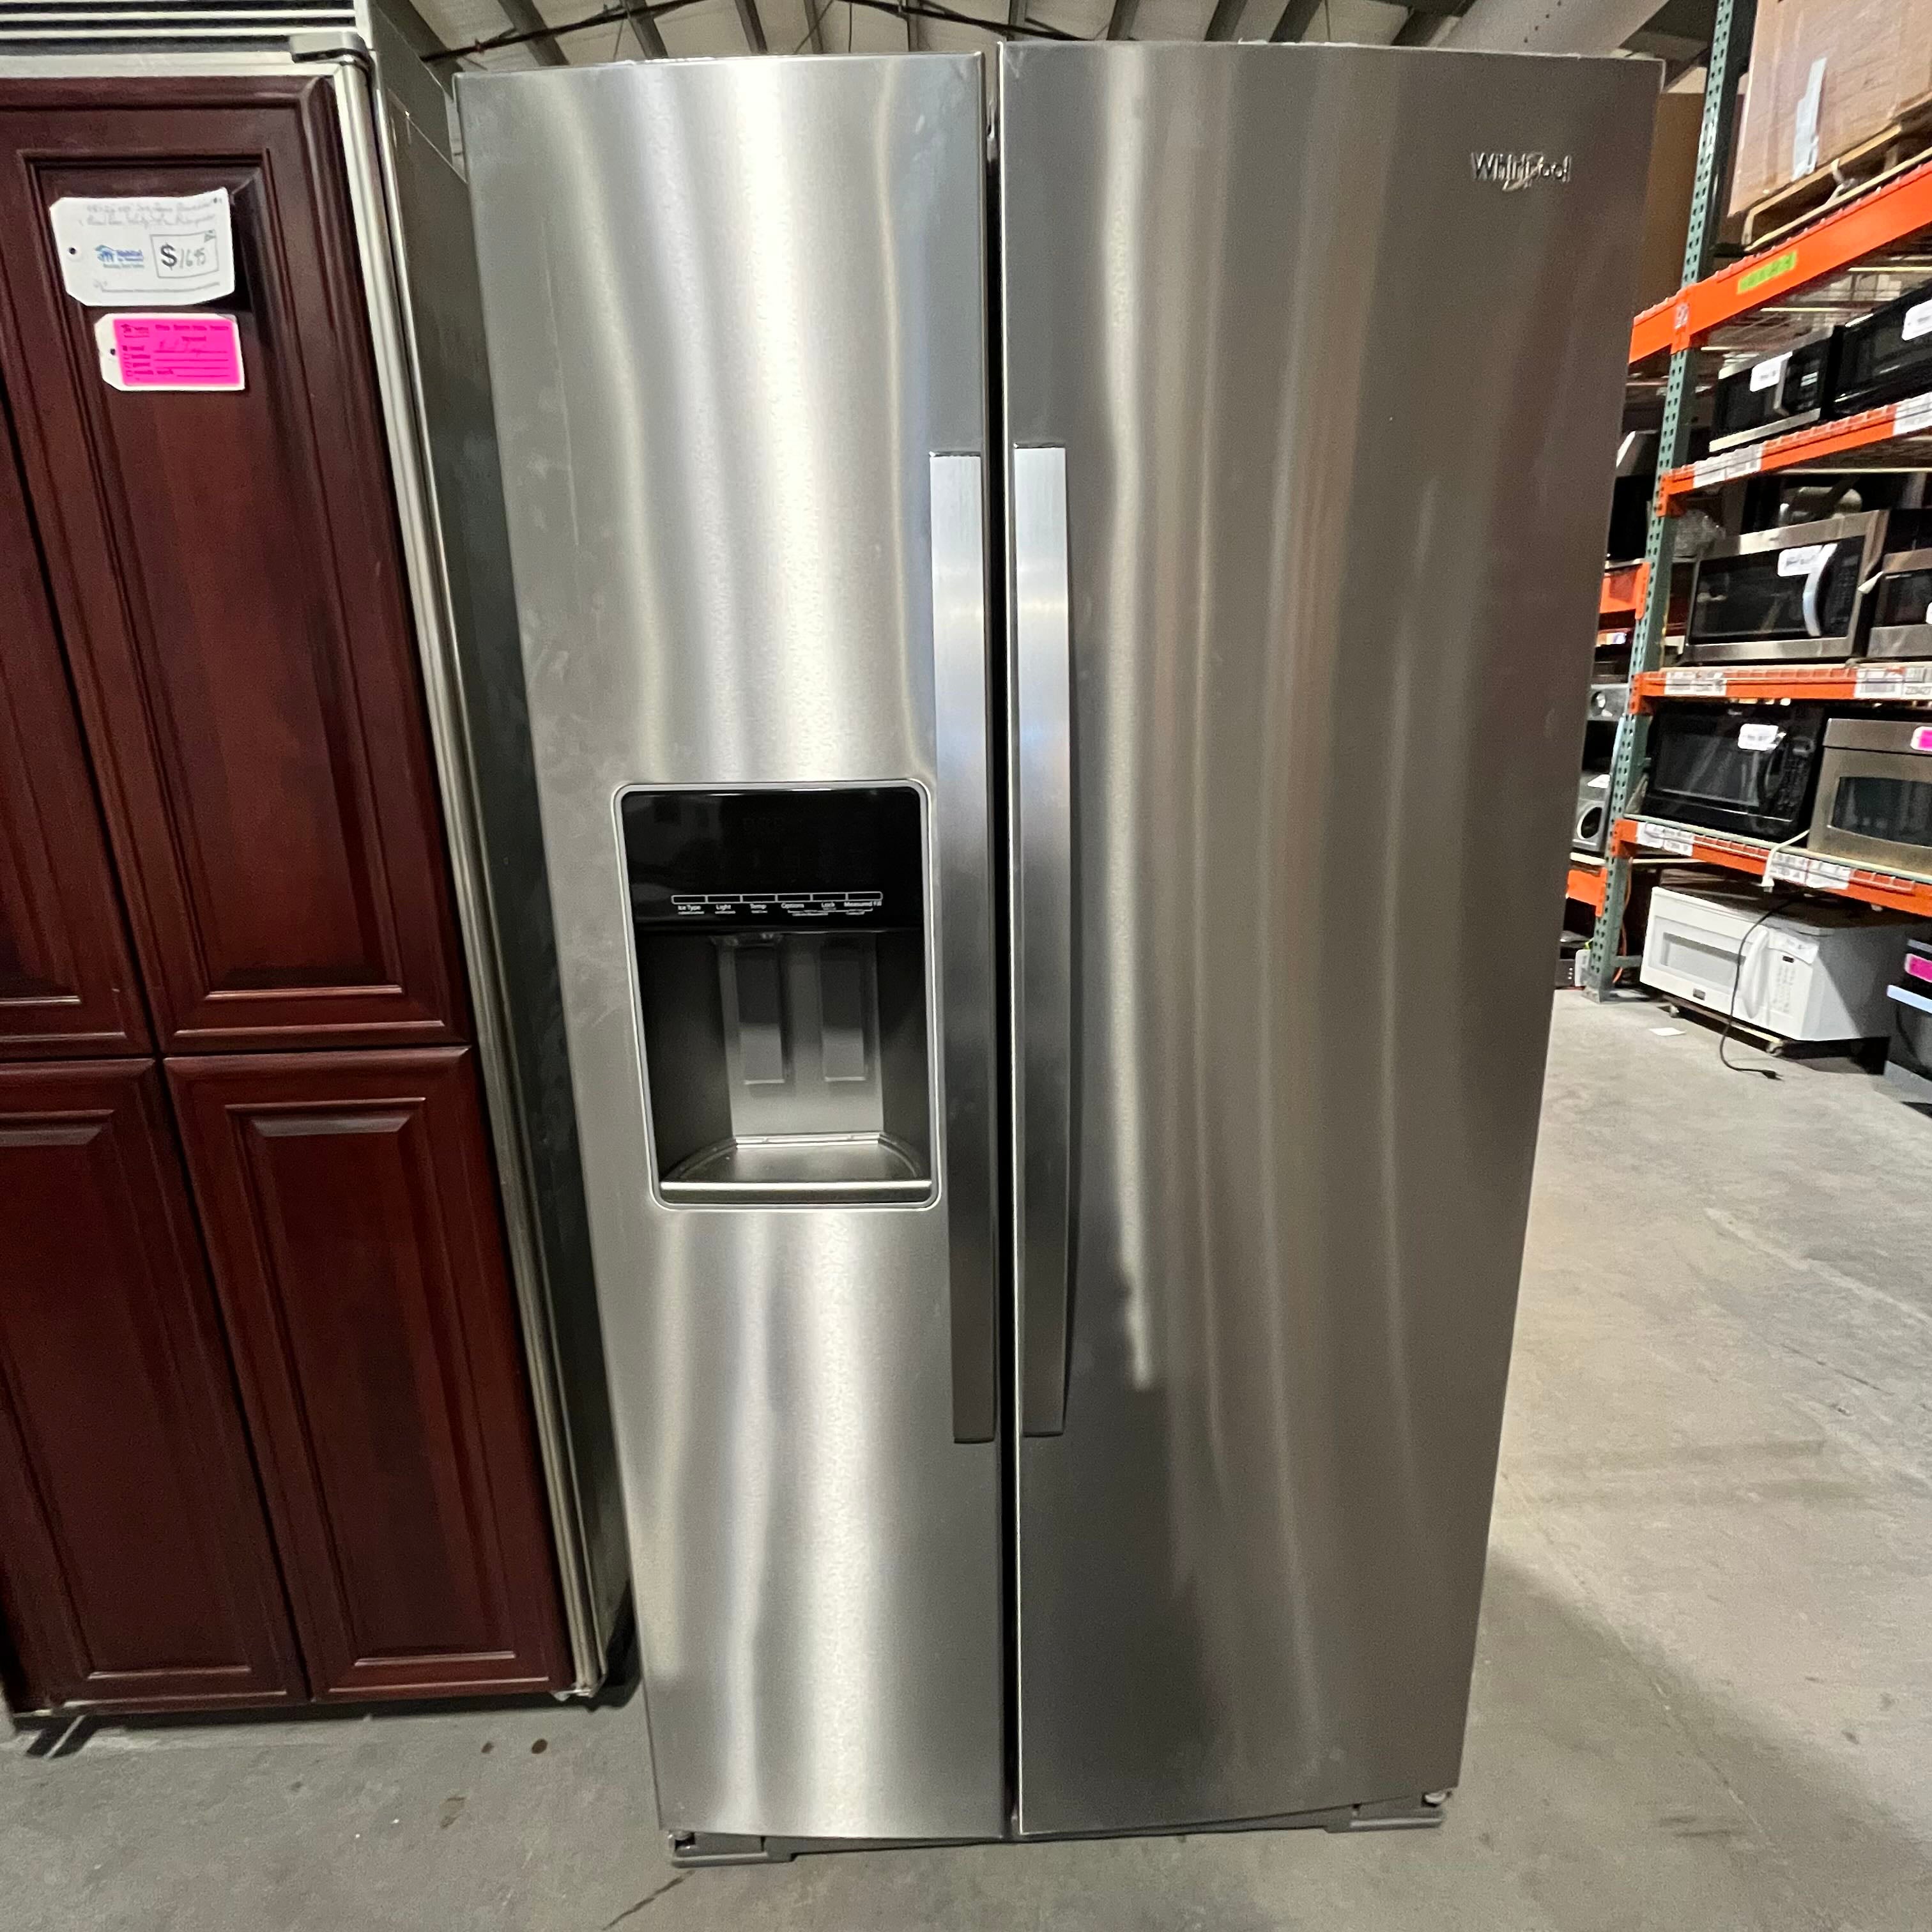 F4823 Whirlpool Side by Side Stainless Steel Refrigerator